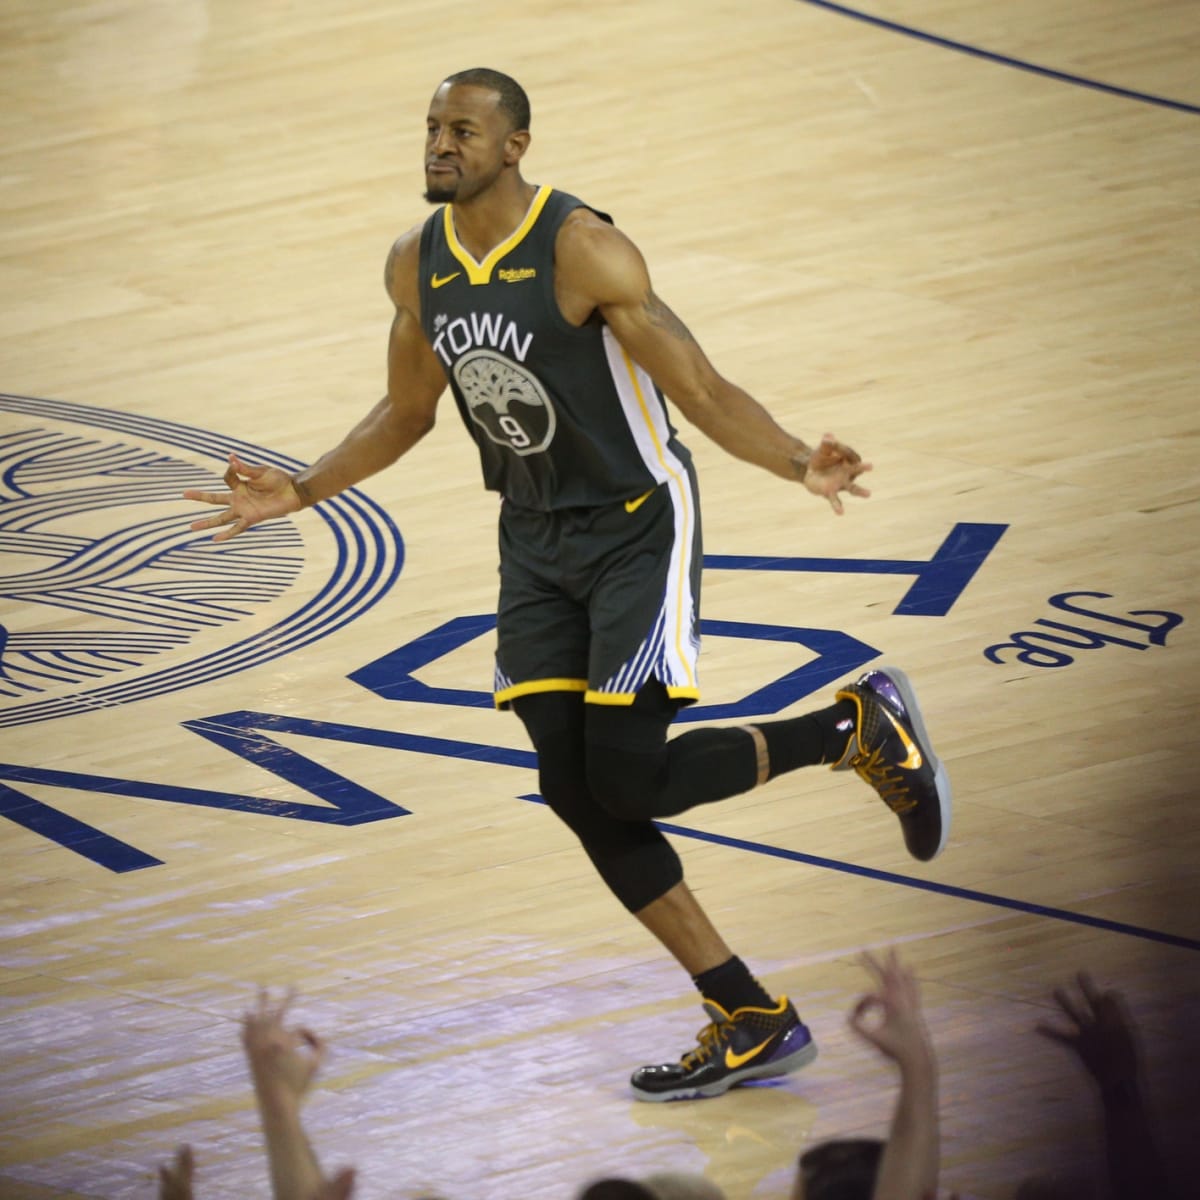 Memphis Grizzlies fans will get one last chance to boo Andre Iguodala